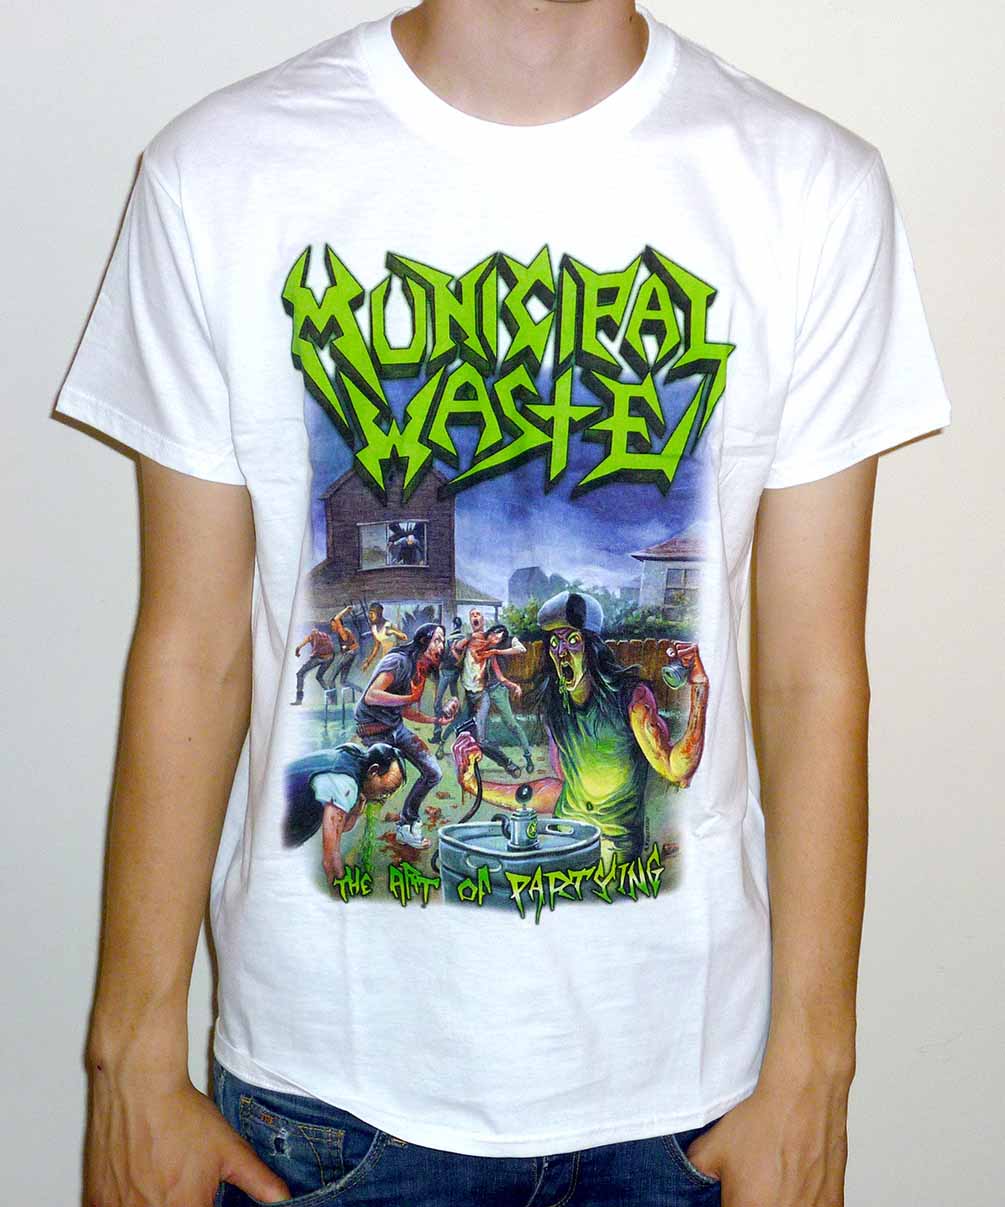 Municipal Waste "The Art Of Partying" White T-shirt